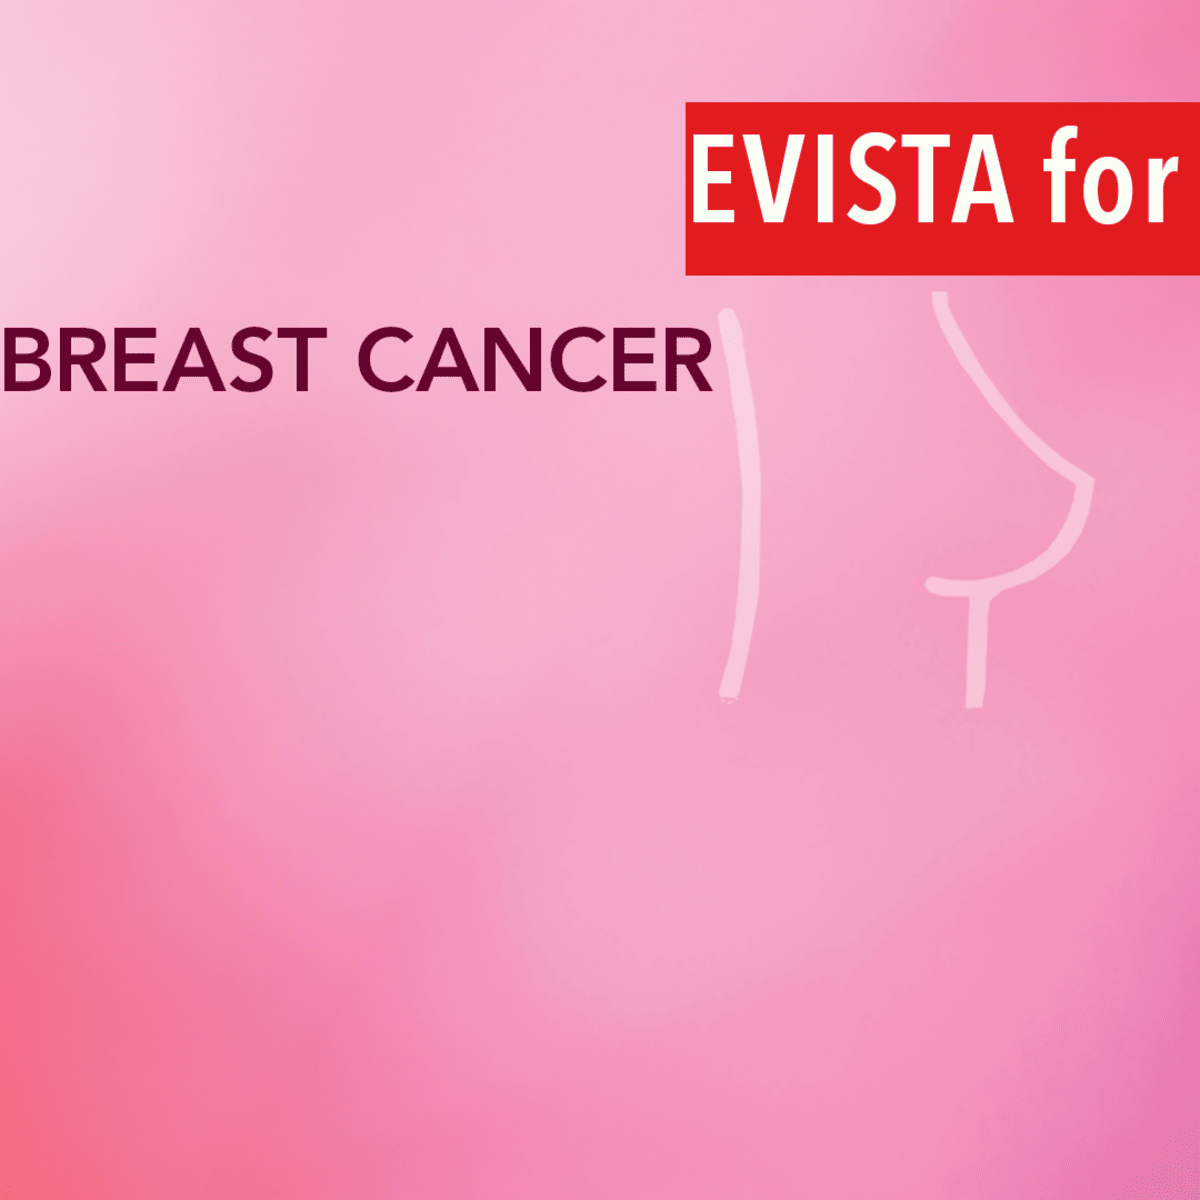 Evista® Approved for Prevention of Breast Cancer - CancerConnect